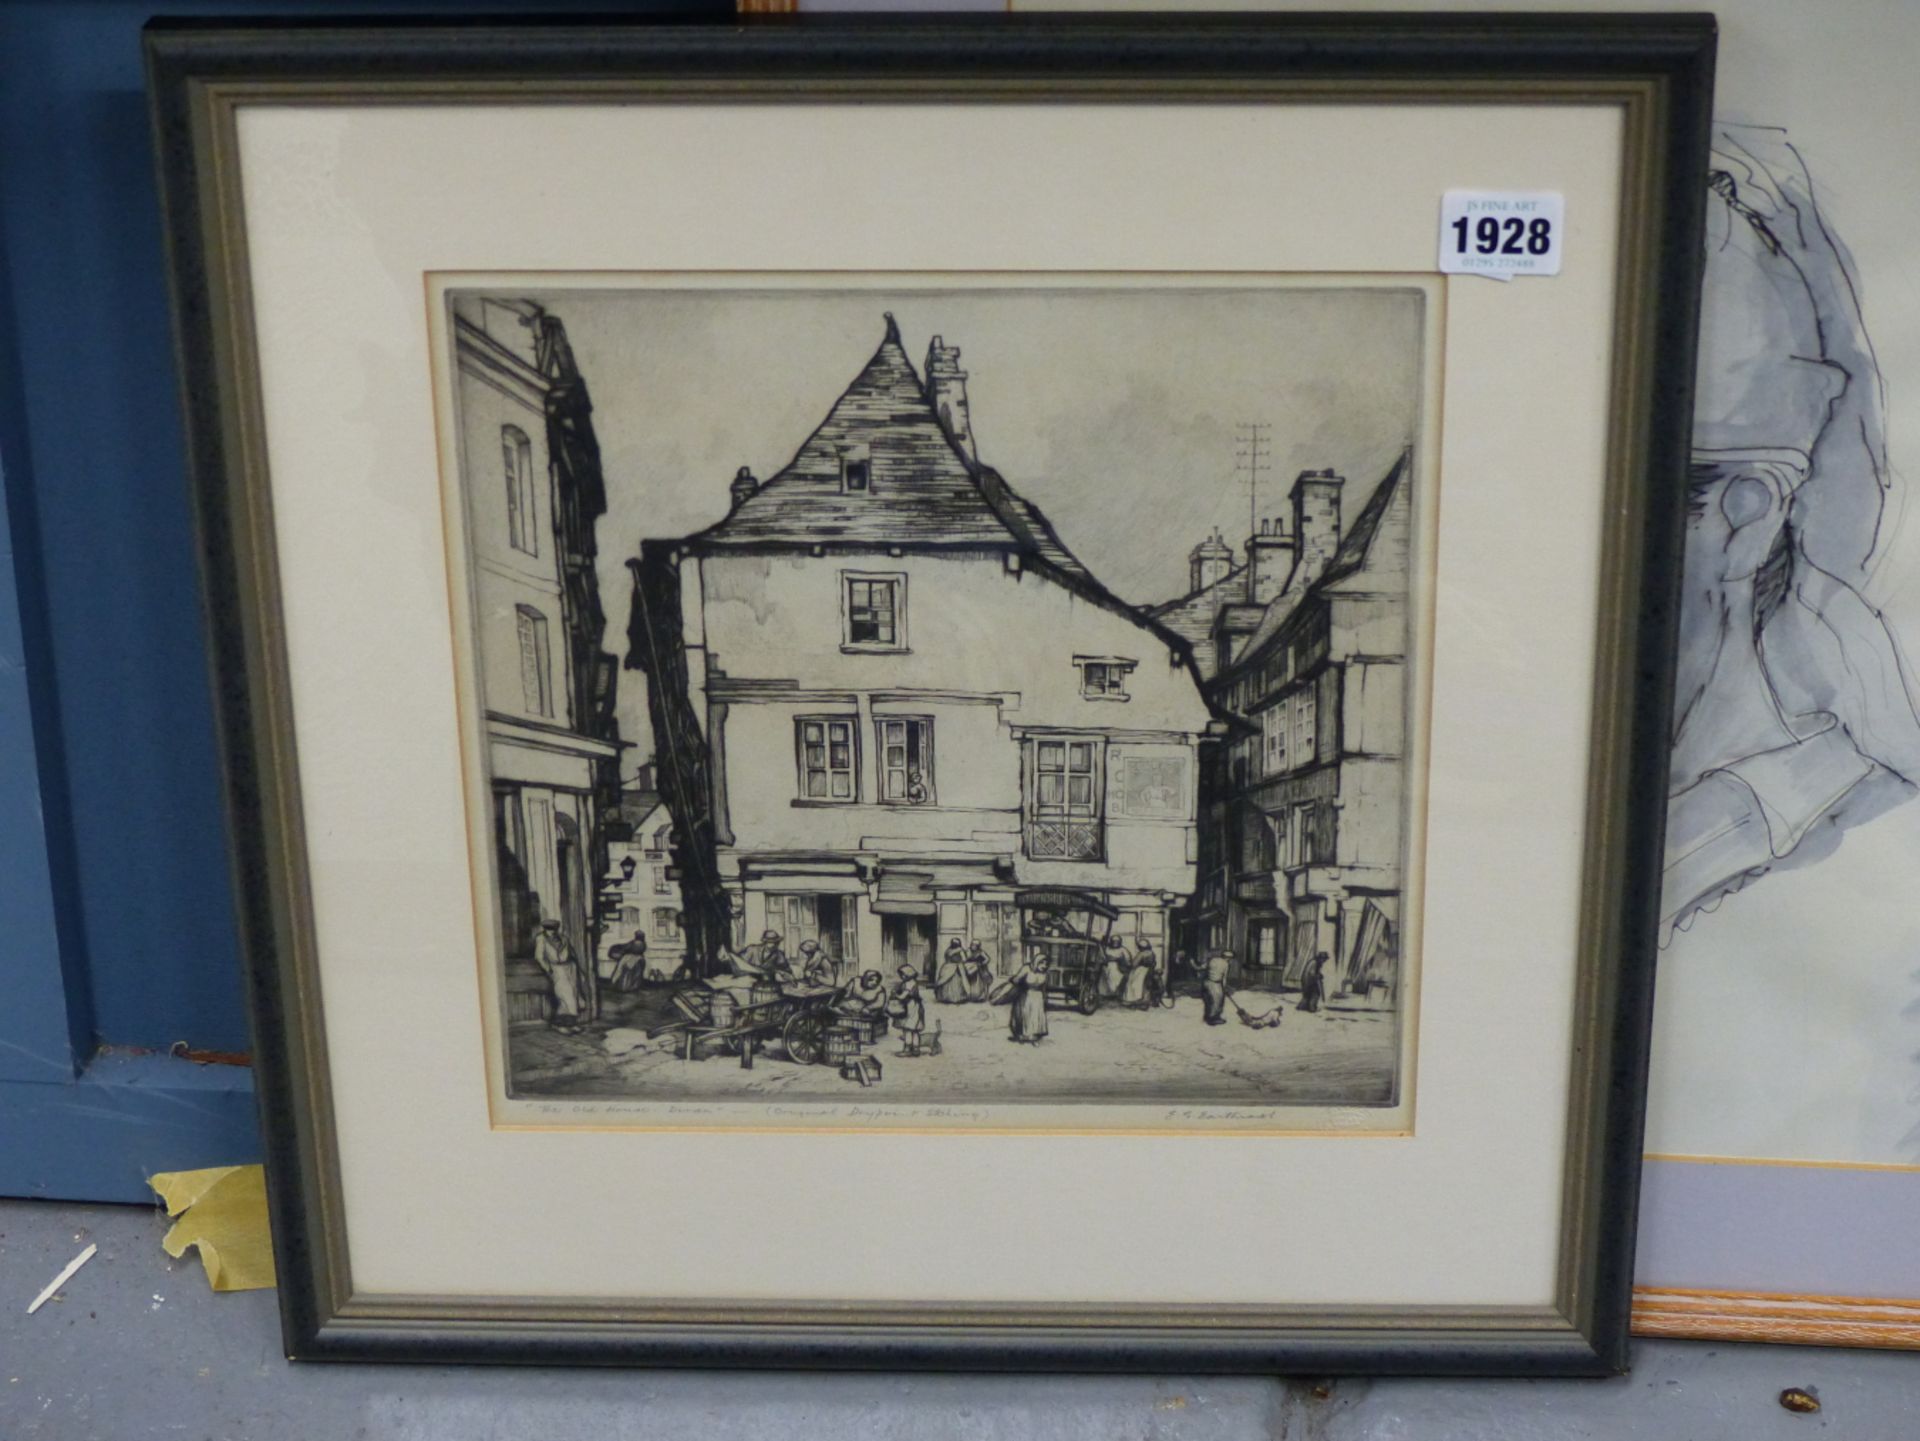 ELIAB GEORGE EARTHROWL, BRITISH 1878-1965. THE OLD HOUSE - DINAN (1928). ARTISTS PROOF ETCHING - Image 3 of 4